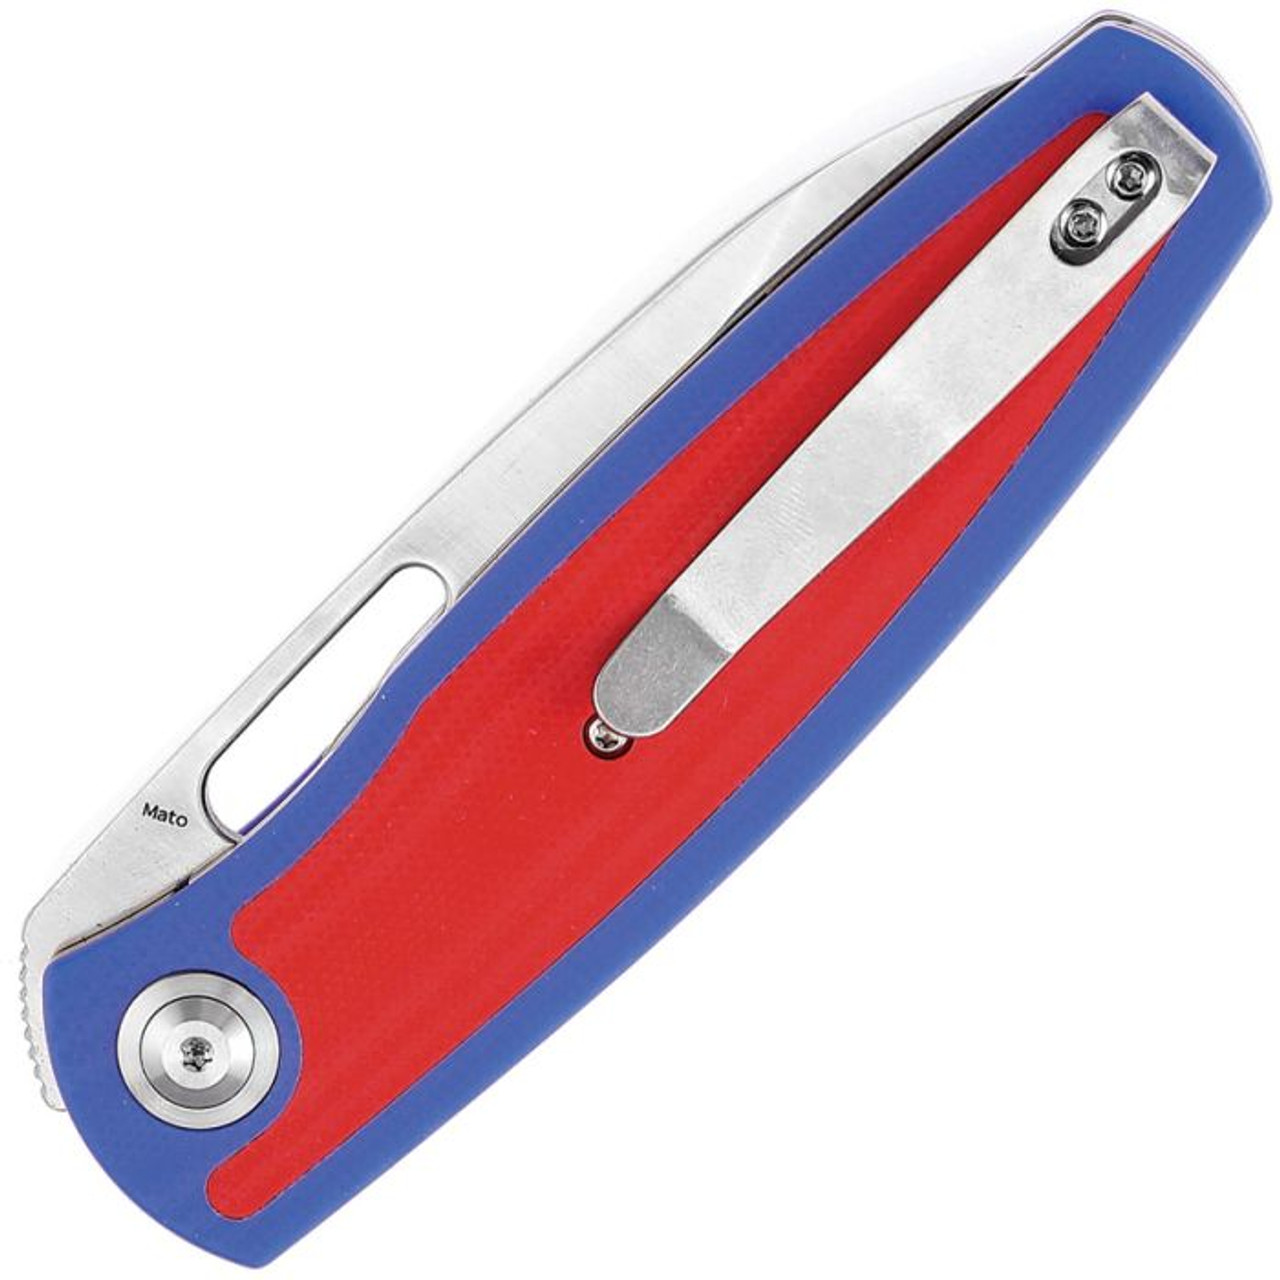 Kansept Knives Mato (K1050A1) 3.3" CPM-S35VN Satin Sheepsfoot Plain Blade, Blue and Red G-10 Handle